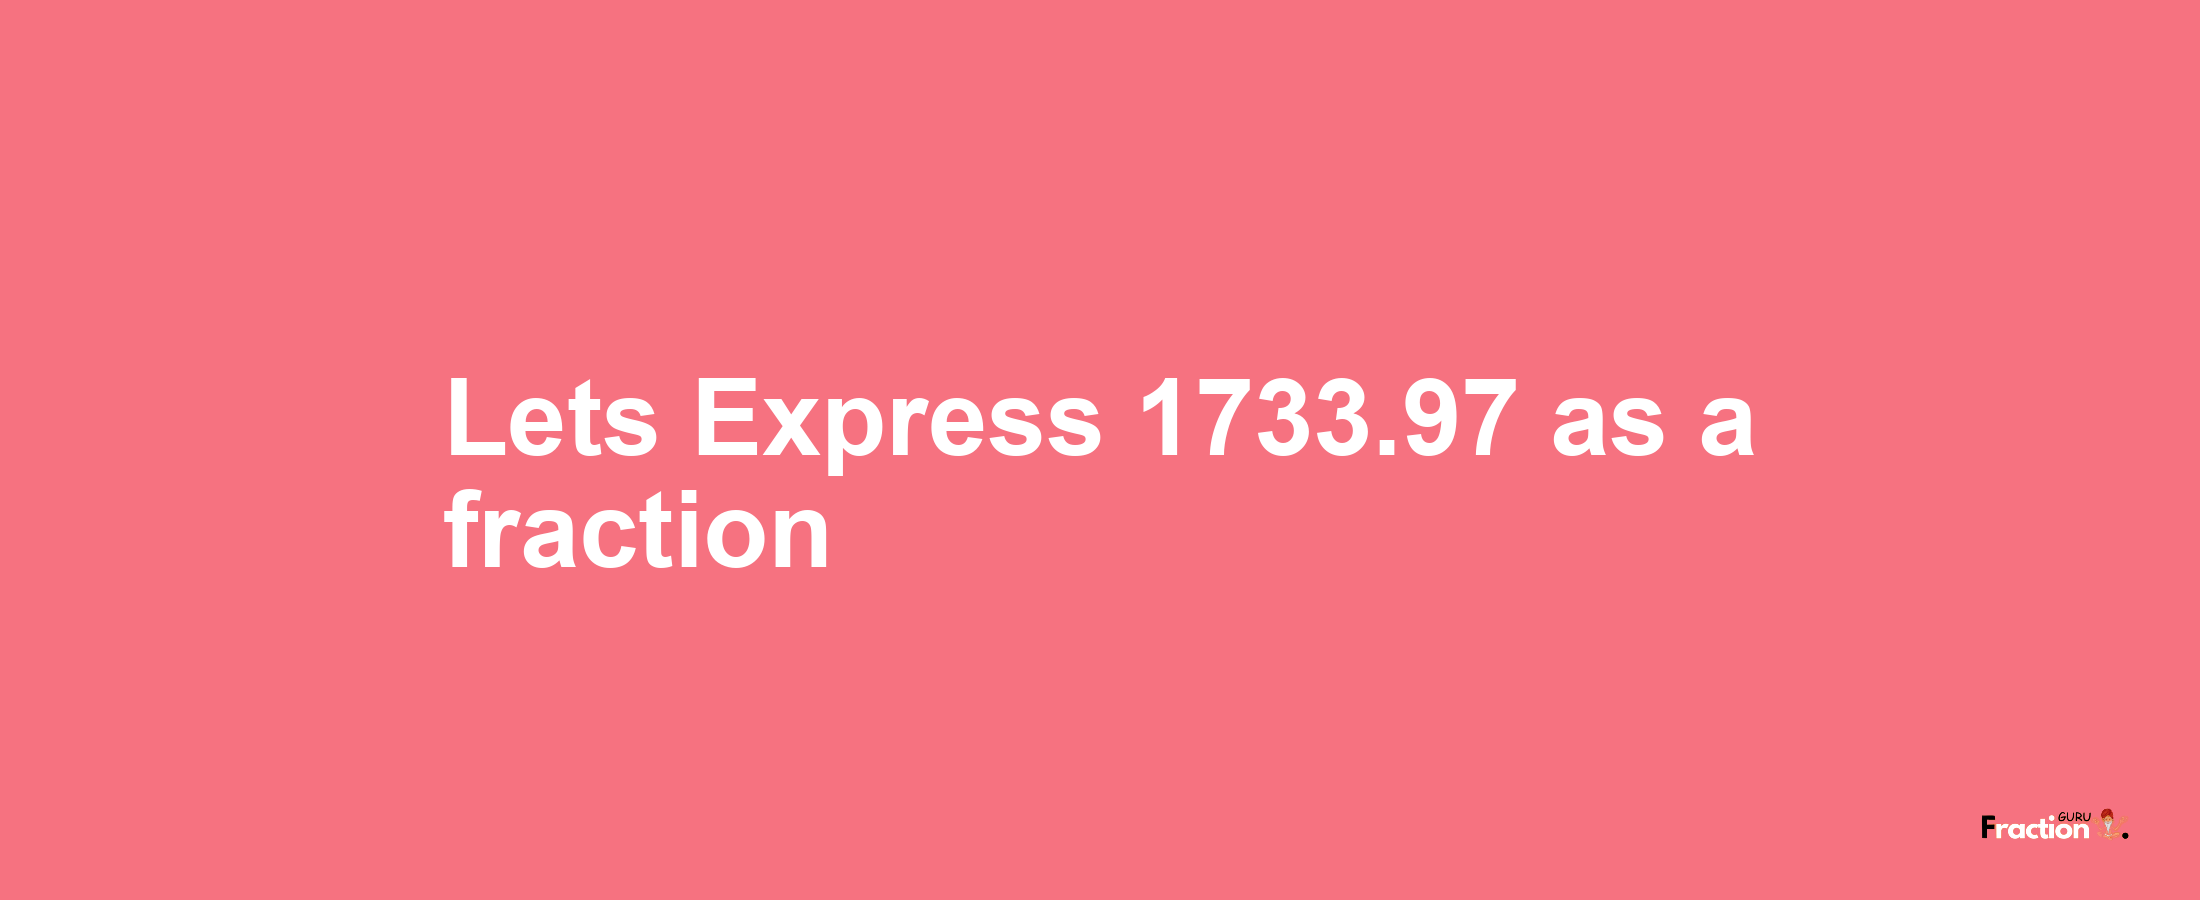 Lets Express 1733.97 as afraction